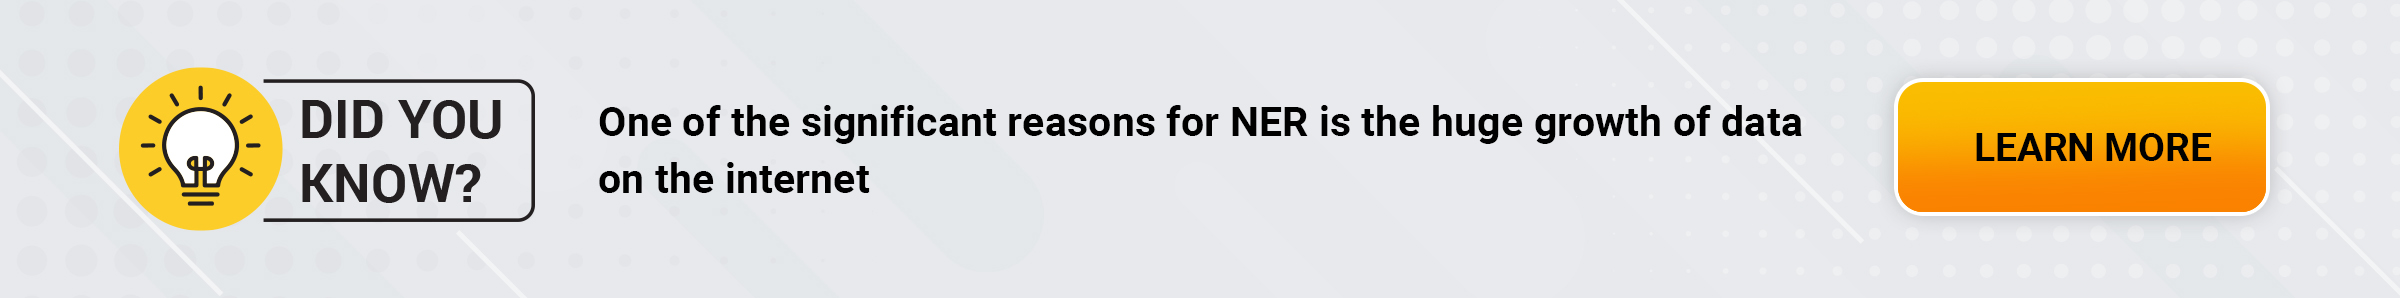 One of the significant reasons for the adoption of NER is the massive growth of data on the internet.